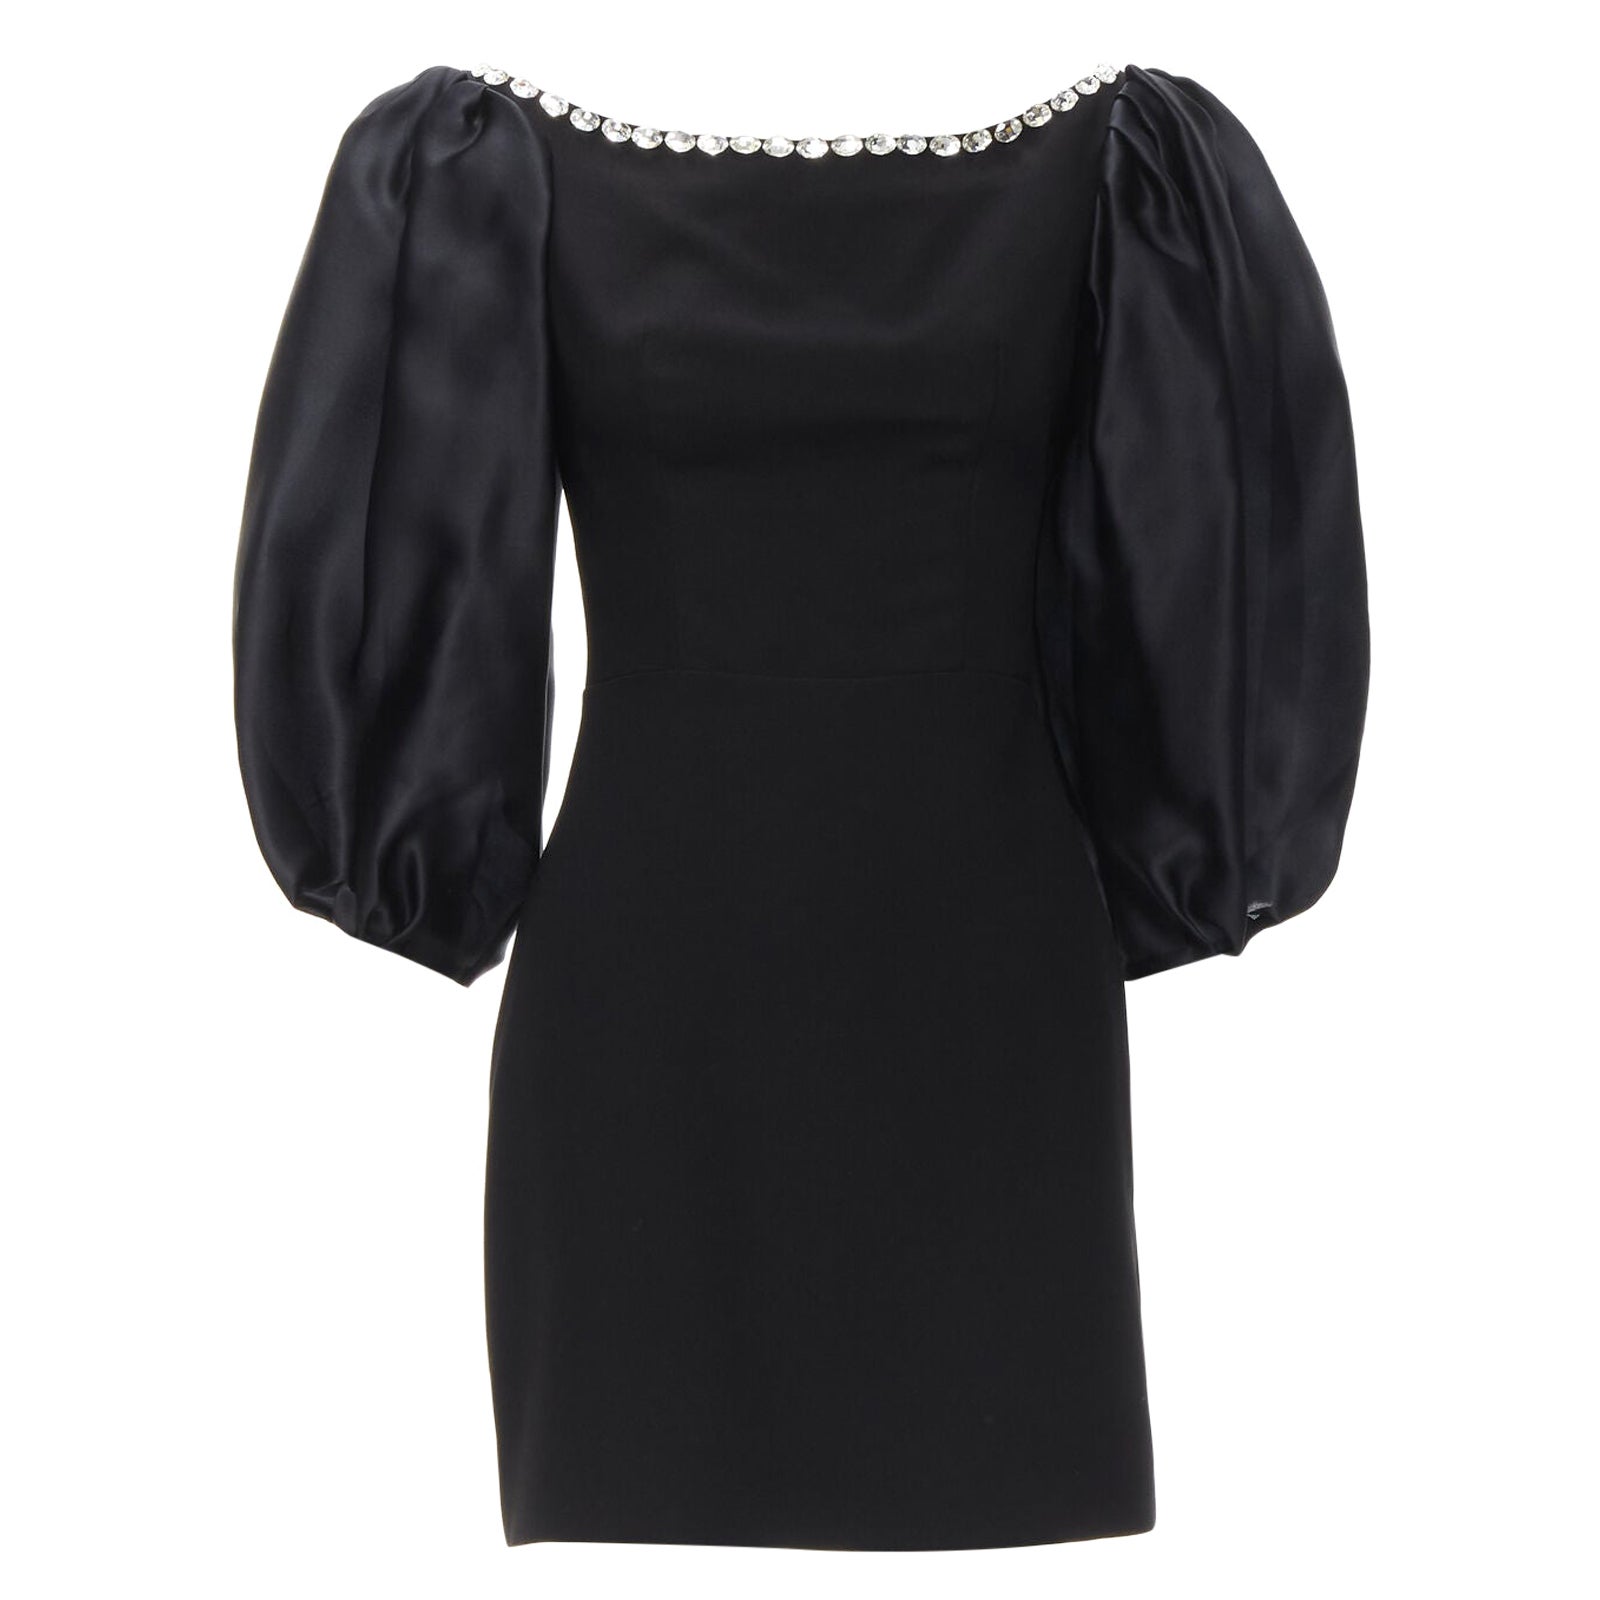 RASARIO black crystal embellished neckline puff balloon sleeves dress FR36 S For Sale